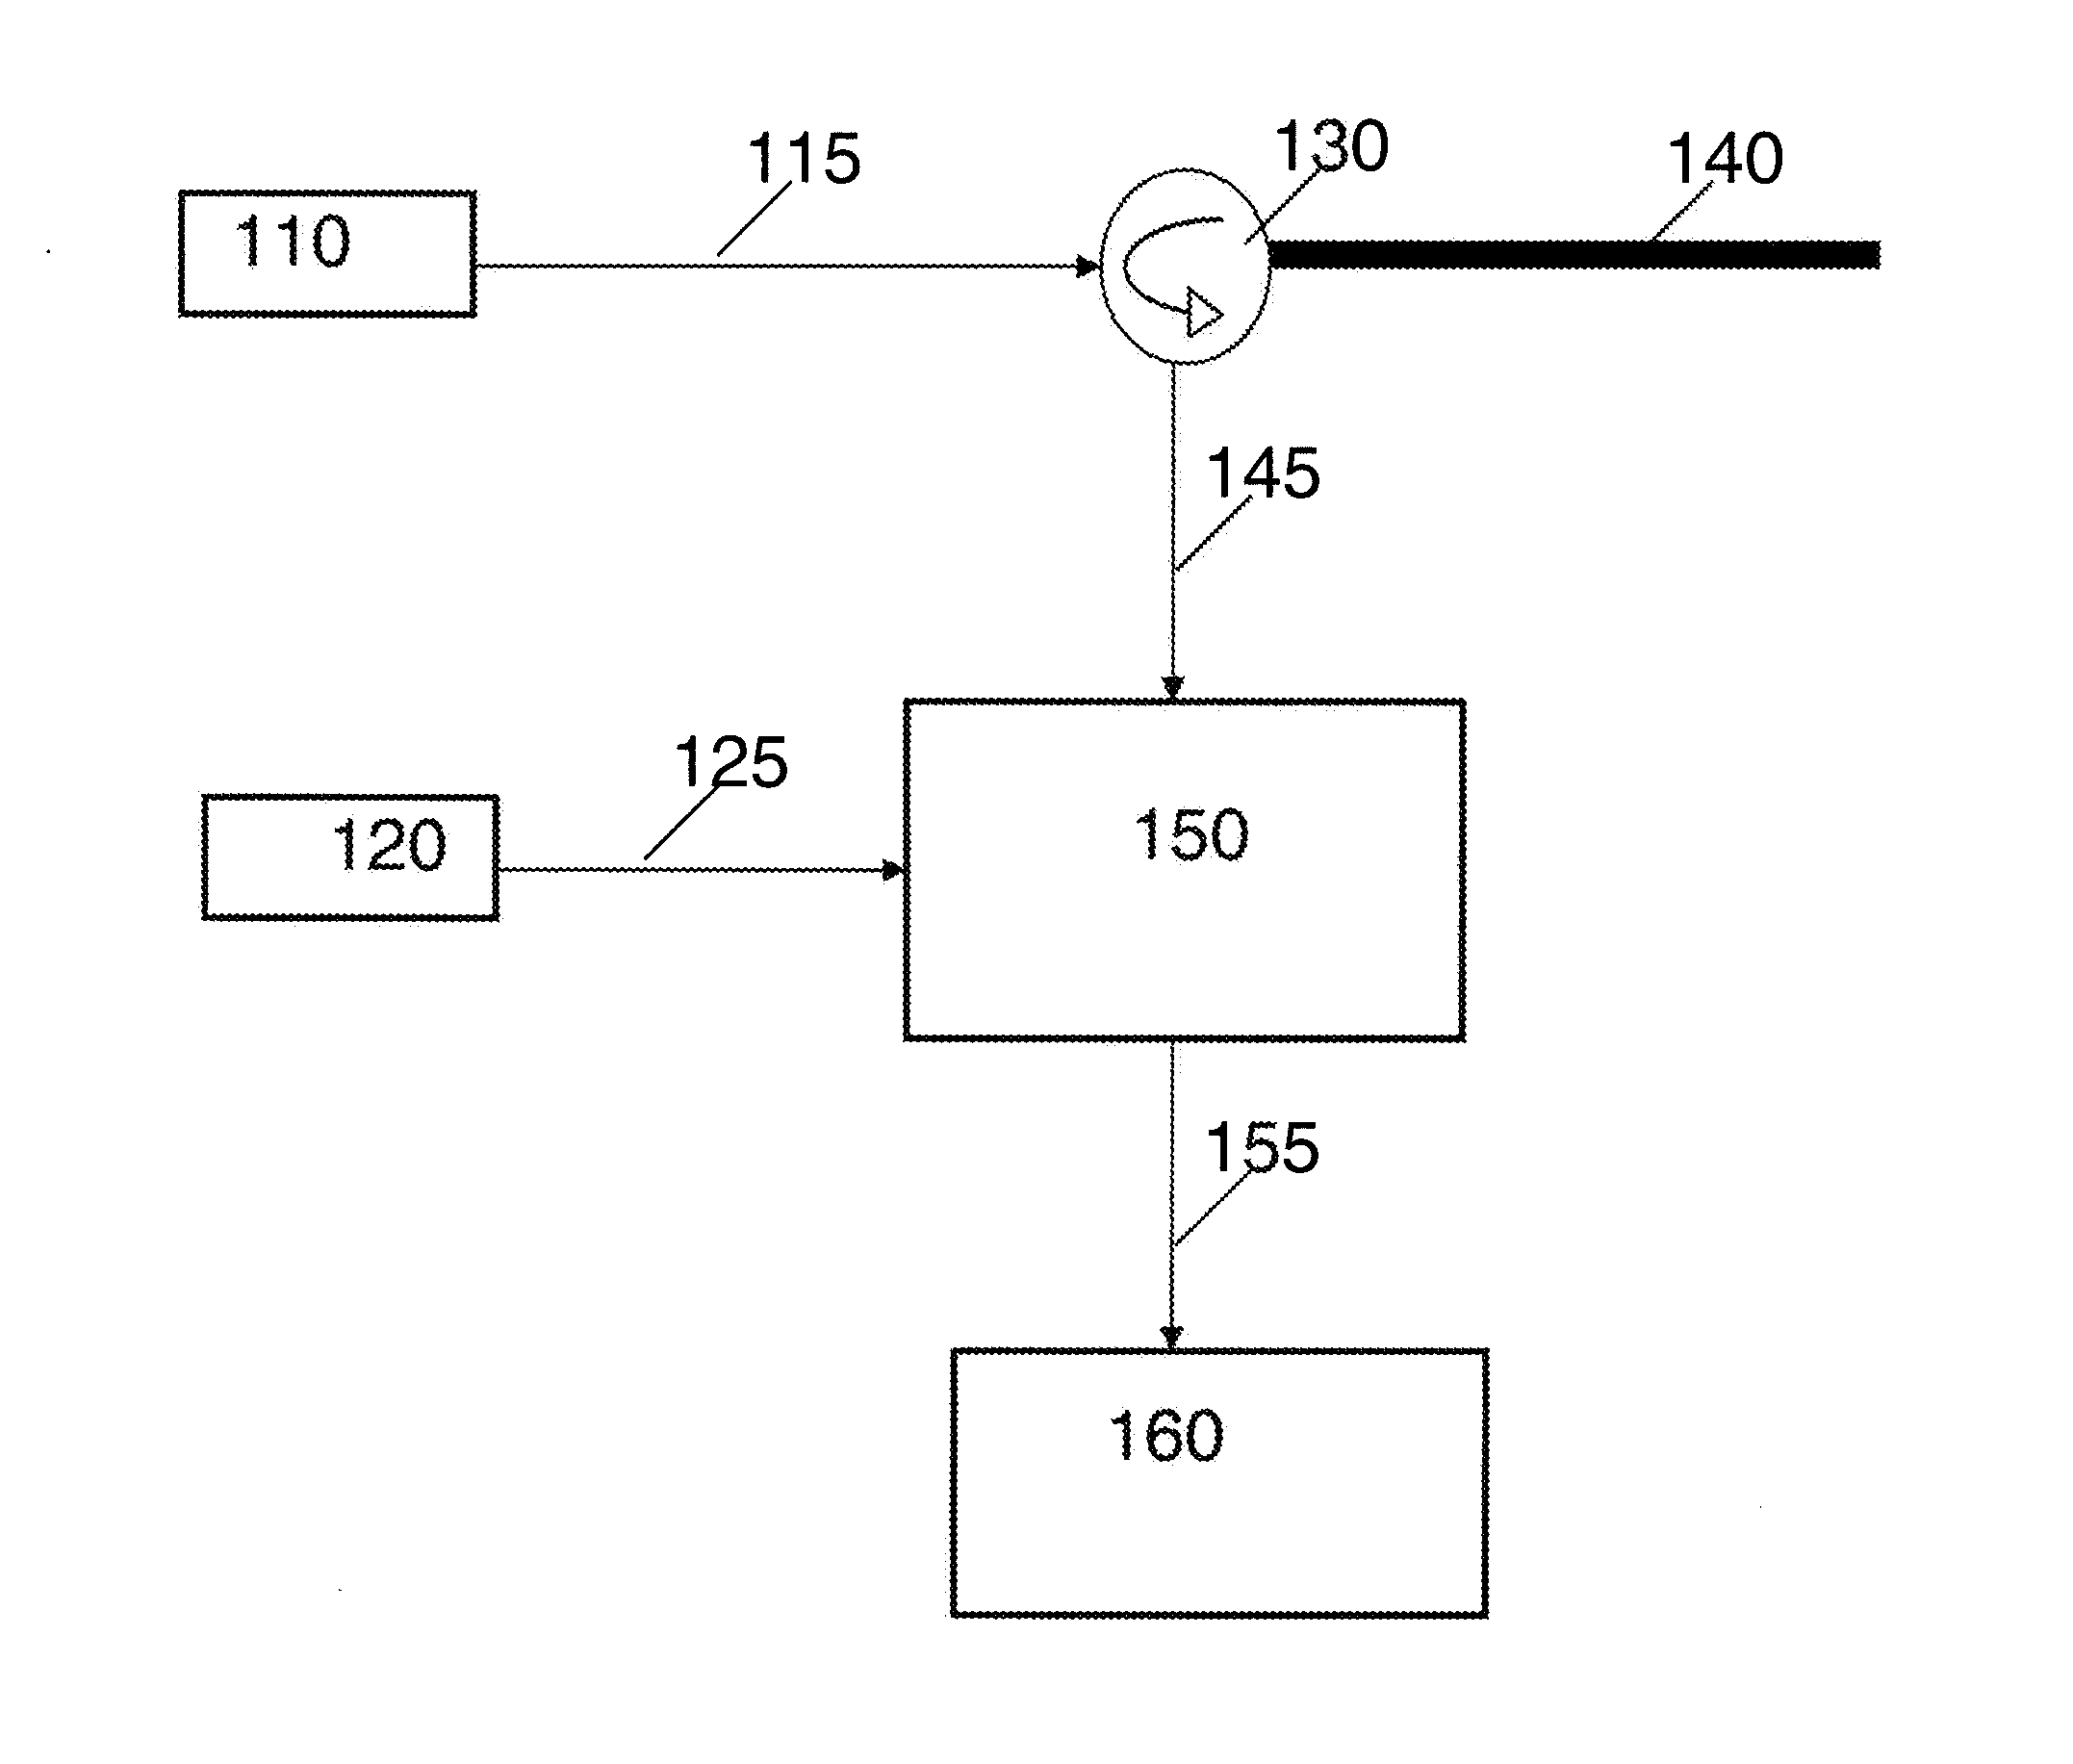 System and method for using coherently locked optical oscillator with brillouin frequency offset for fiber-optics-based distributed temperature and strain sensing applications